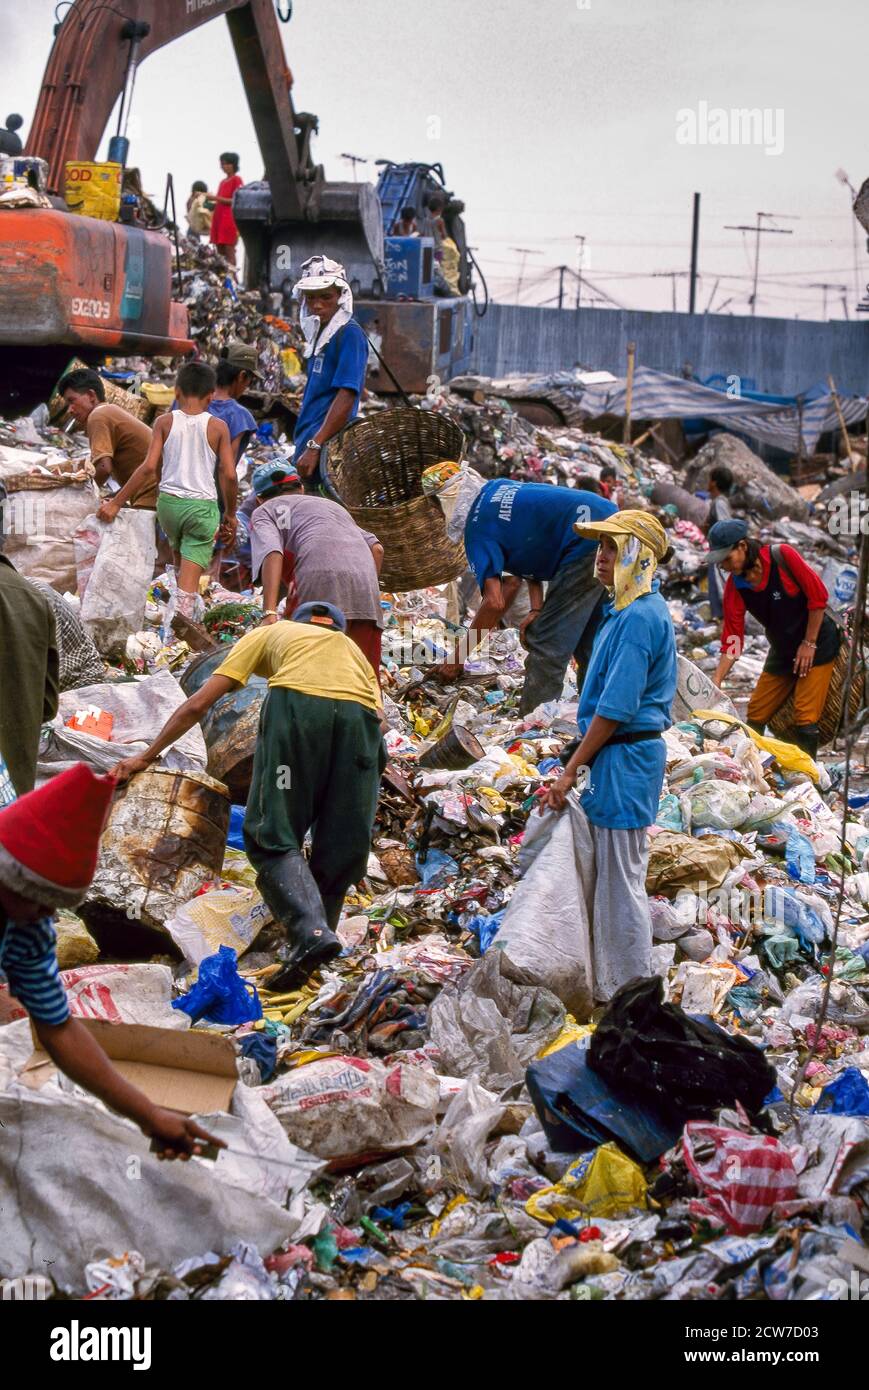 Scavengers at recycling depot, Manila, Philippines Stock Photo